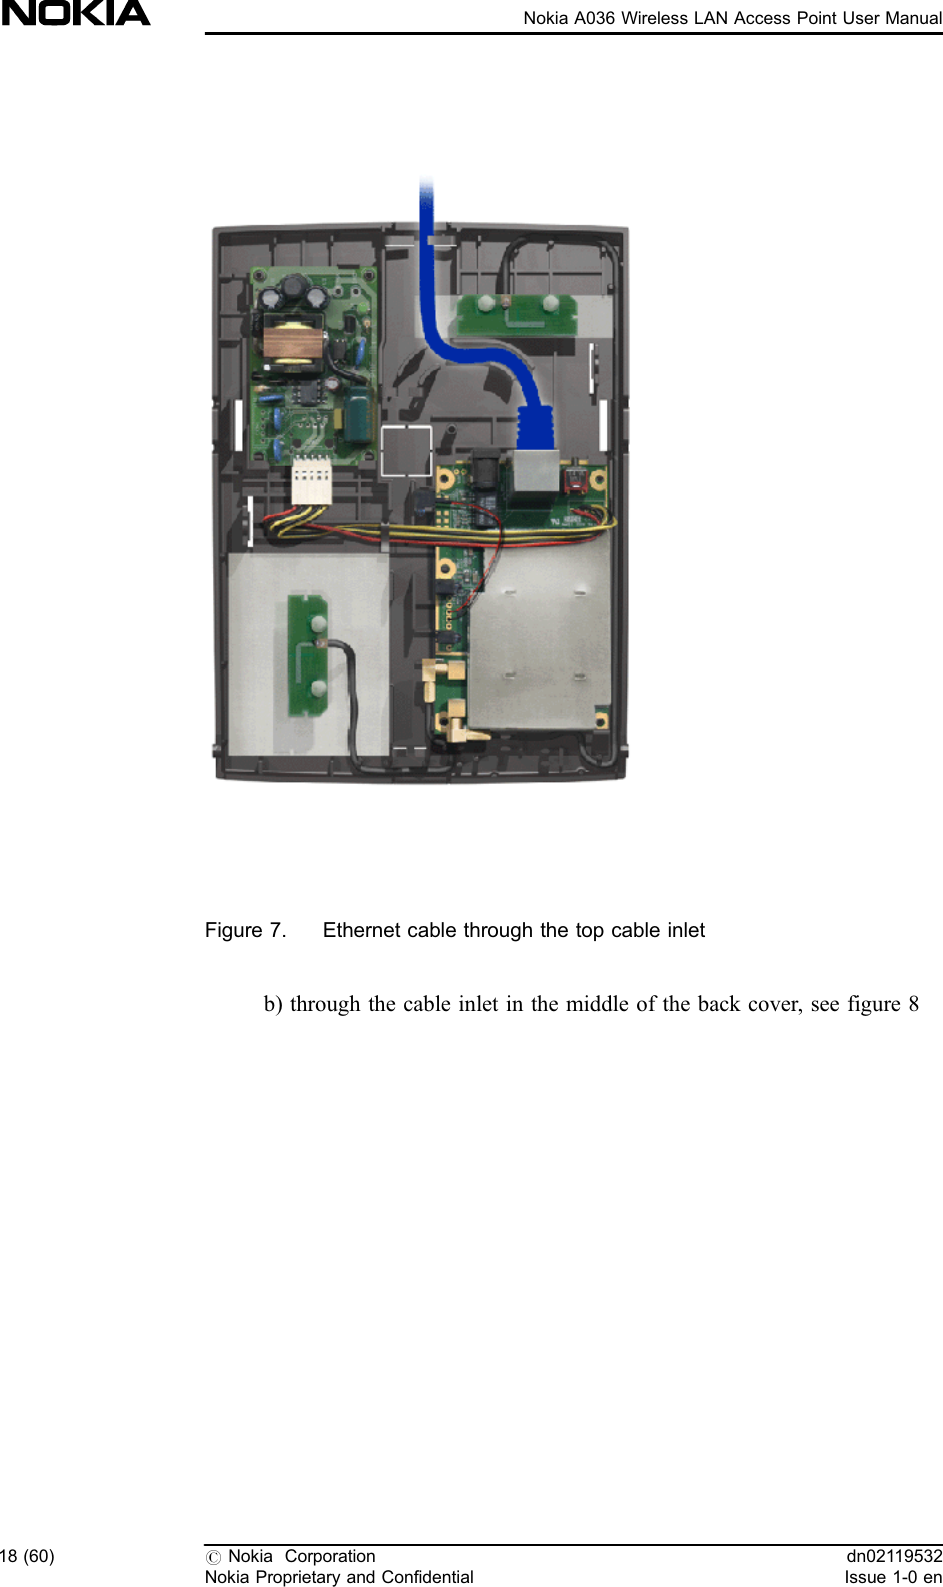 Figure 7. Ethernet cable through the top cable inletb) through the cable inlet in the middle of the back cover, see figure 818 (60) #Nokia CorporationNokia Proprietary and Confidentialdn02119532Issue 1-0 enNokia A036 Wireless LAN Access Point User Manual